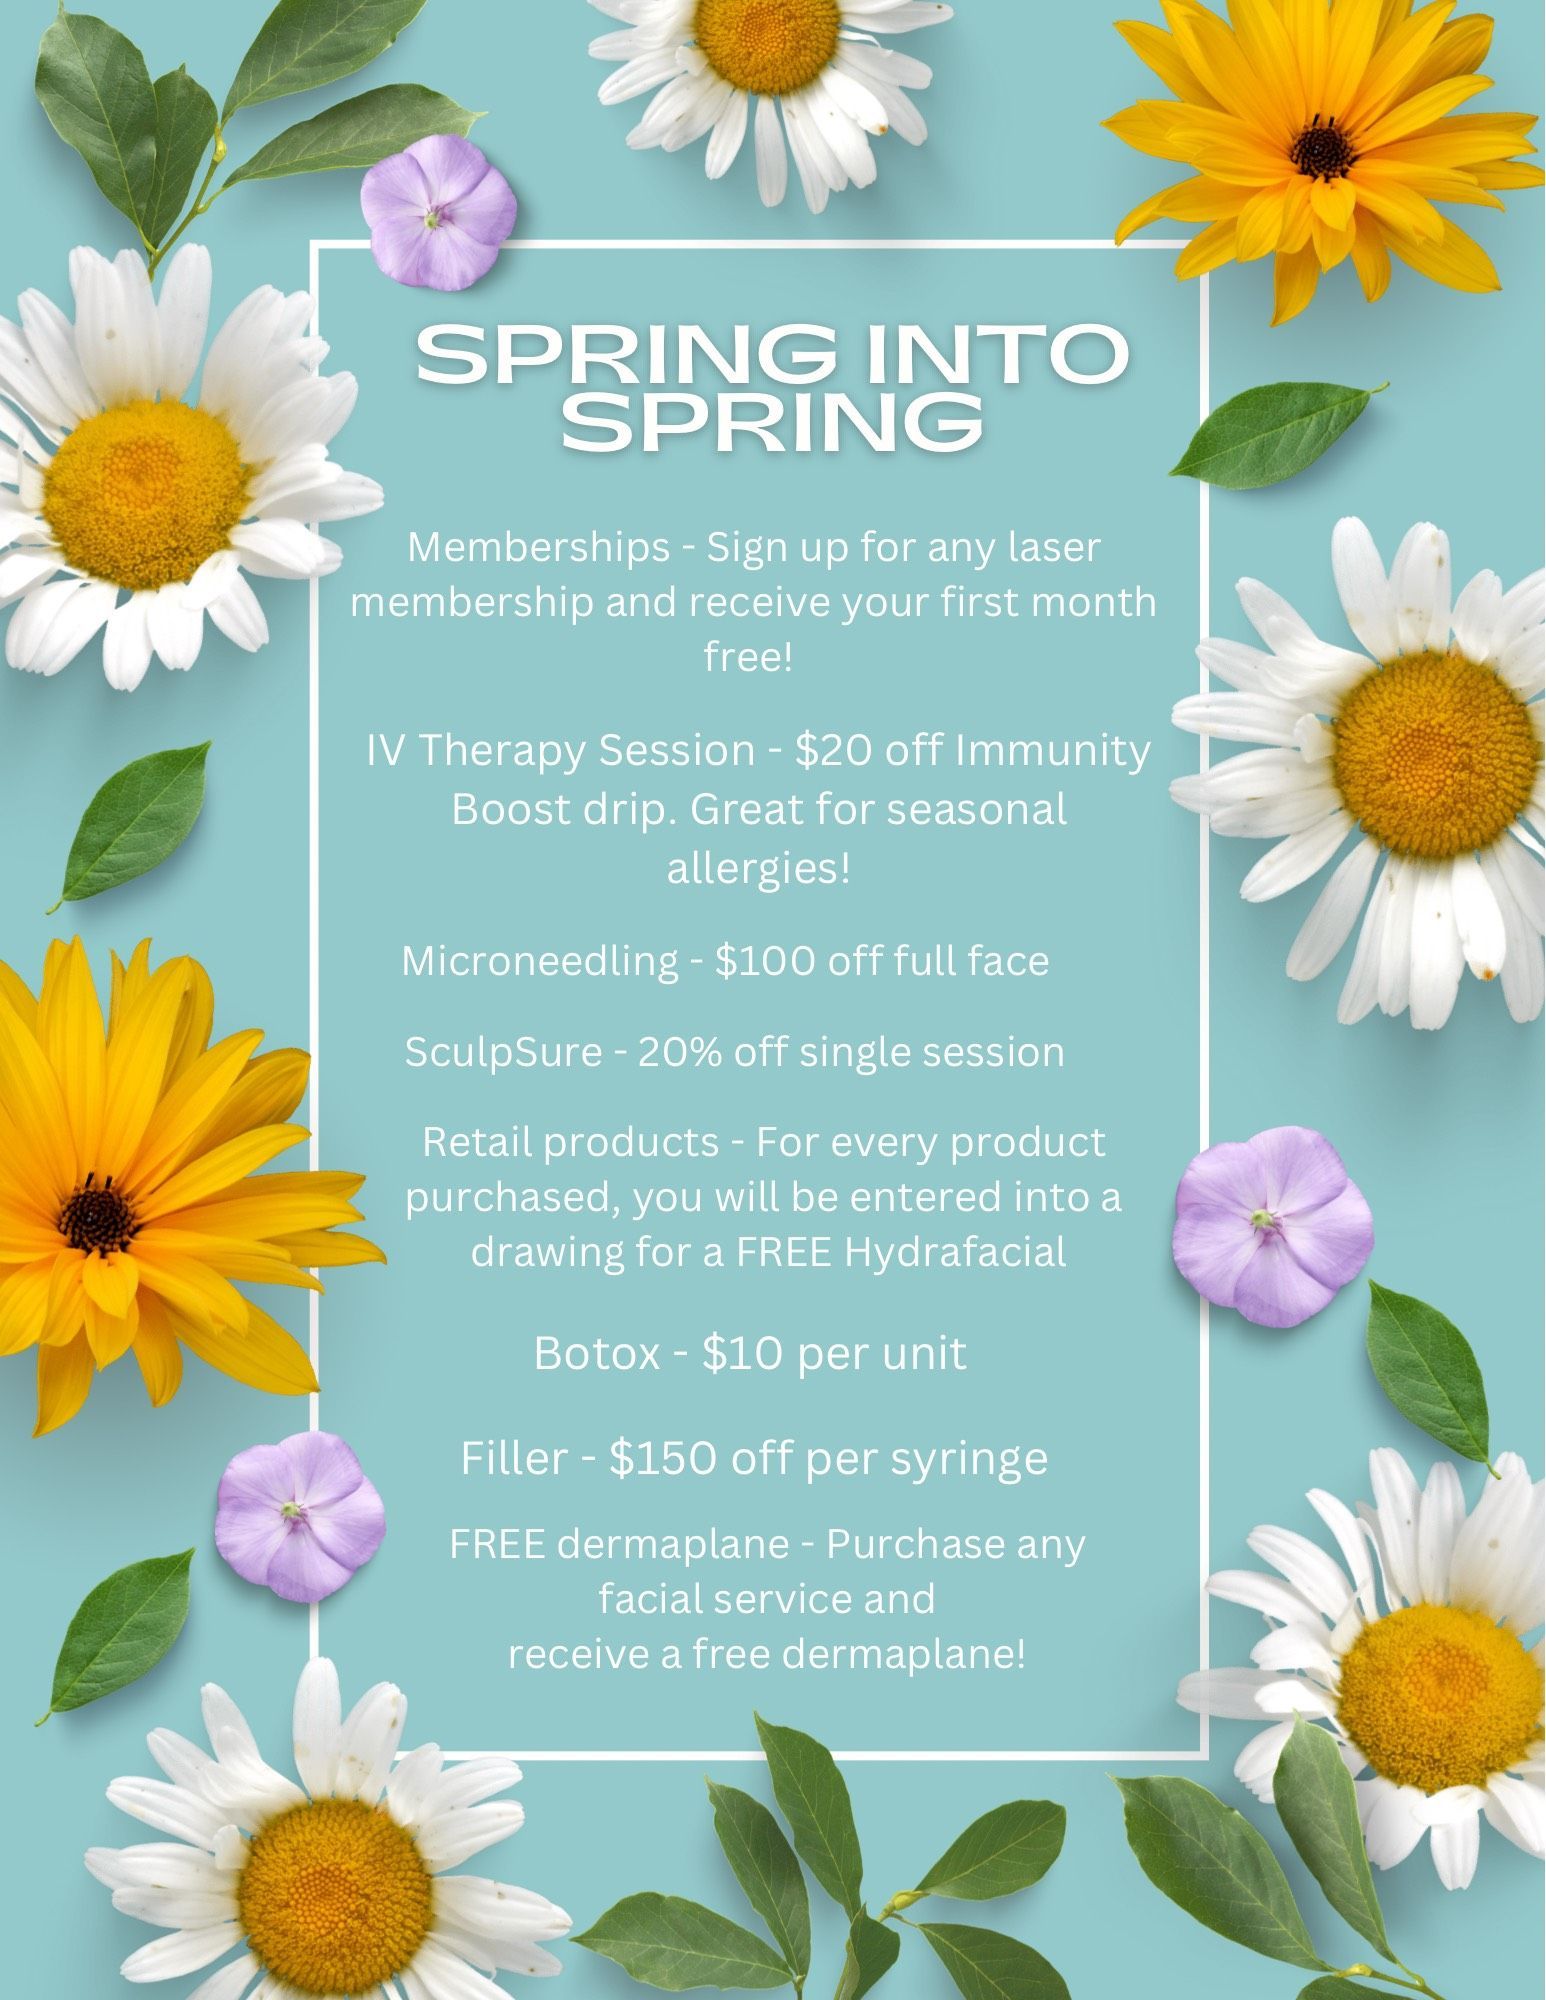 A spring into spring flyer with daisies and leaves on a blue background.